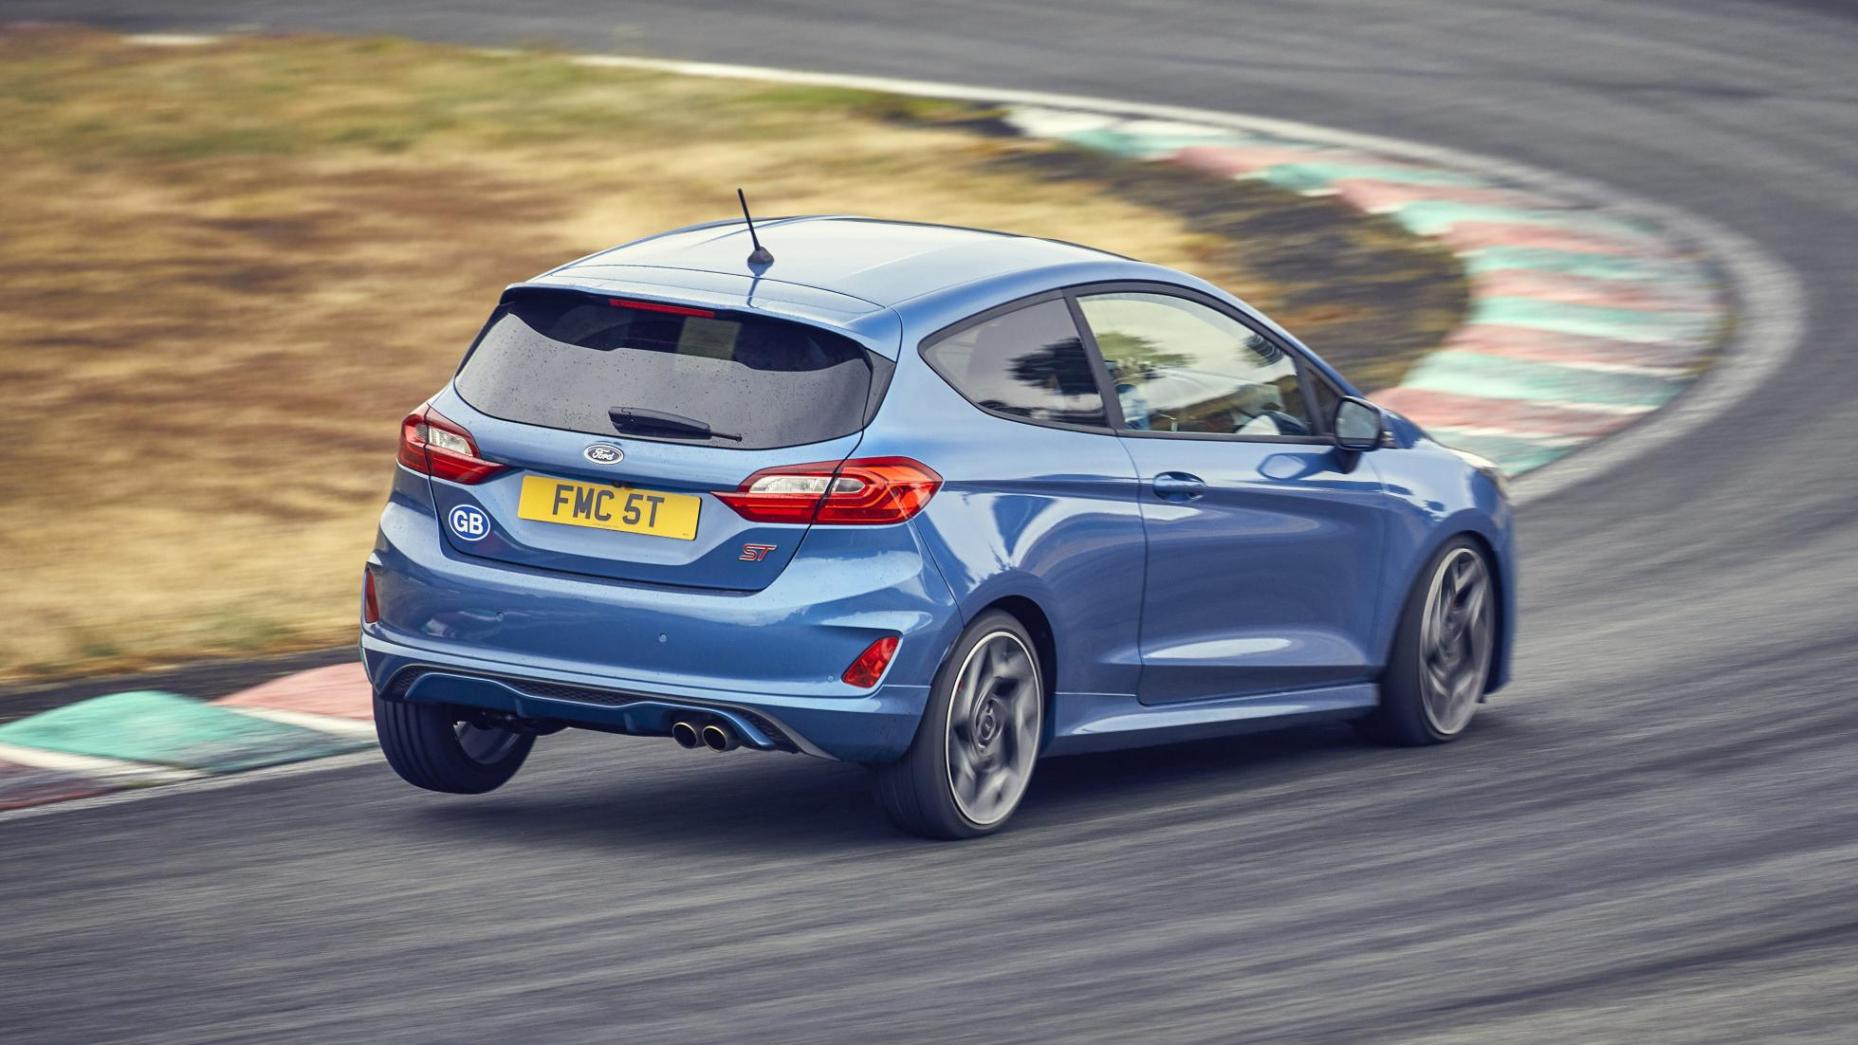 3. 2013 Ford Fiesta ST (and 2018)